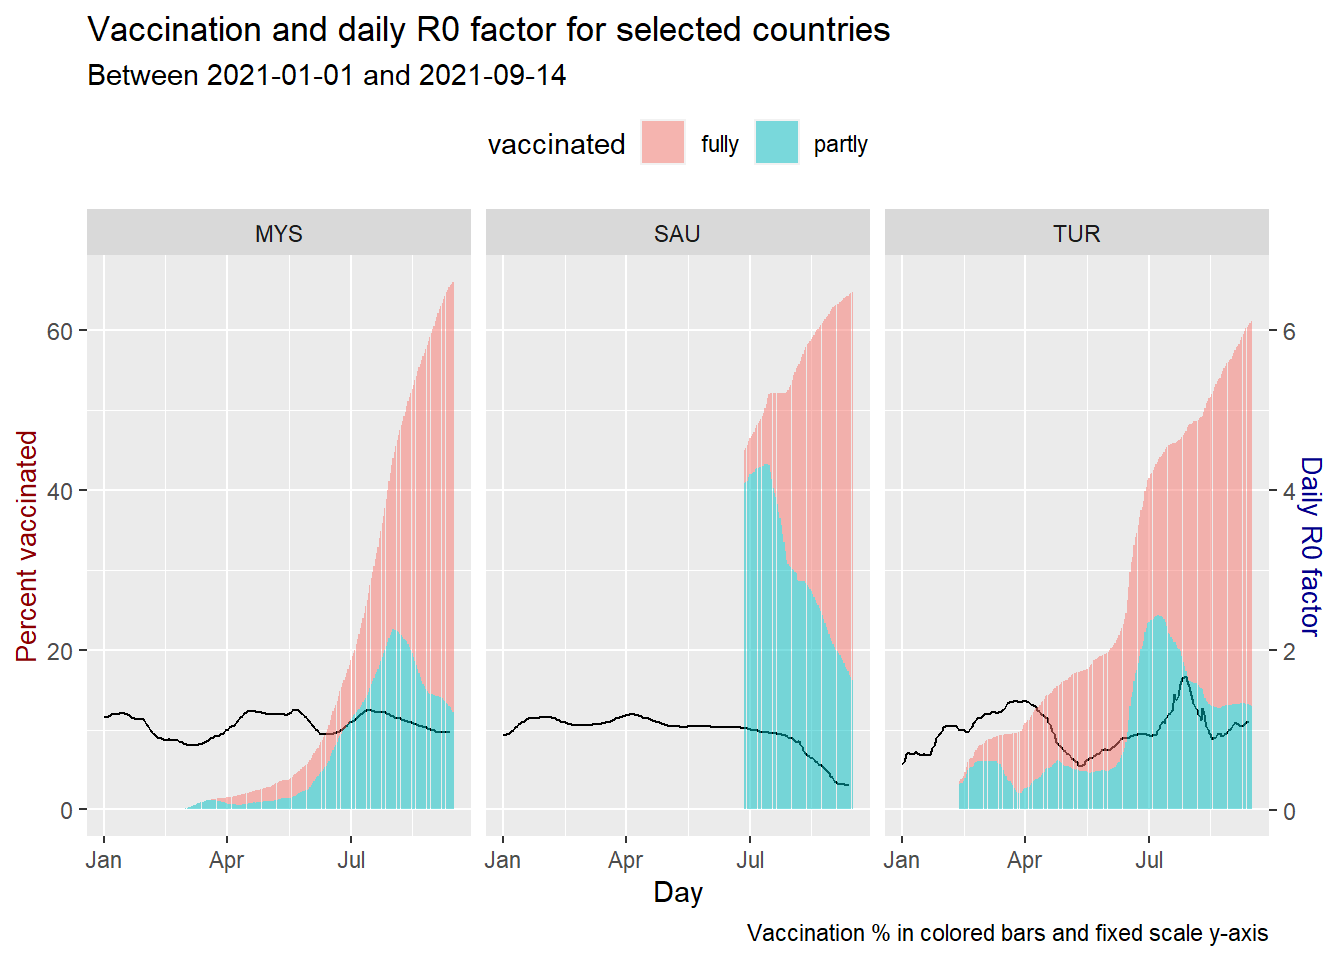 Vaccination trend and R0 for selected countries